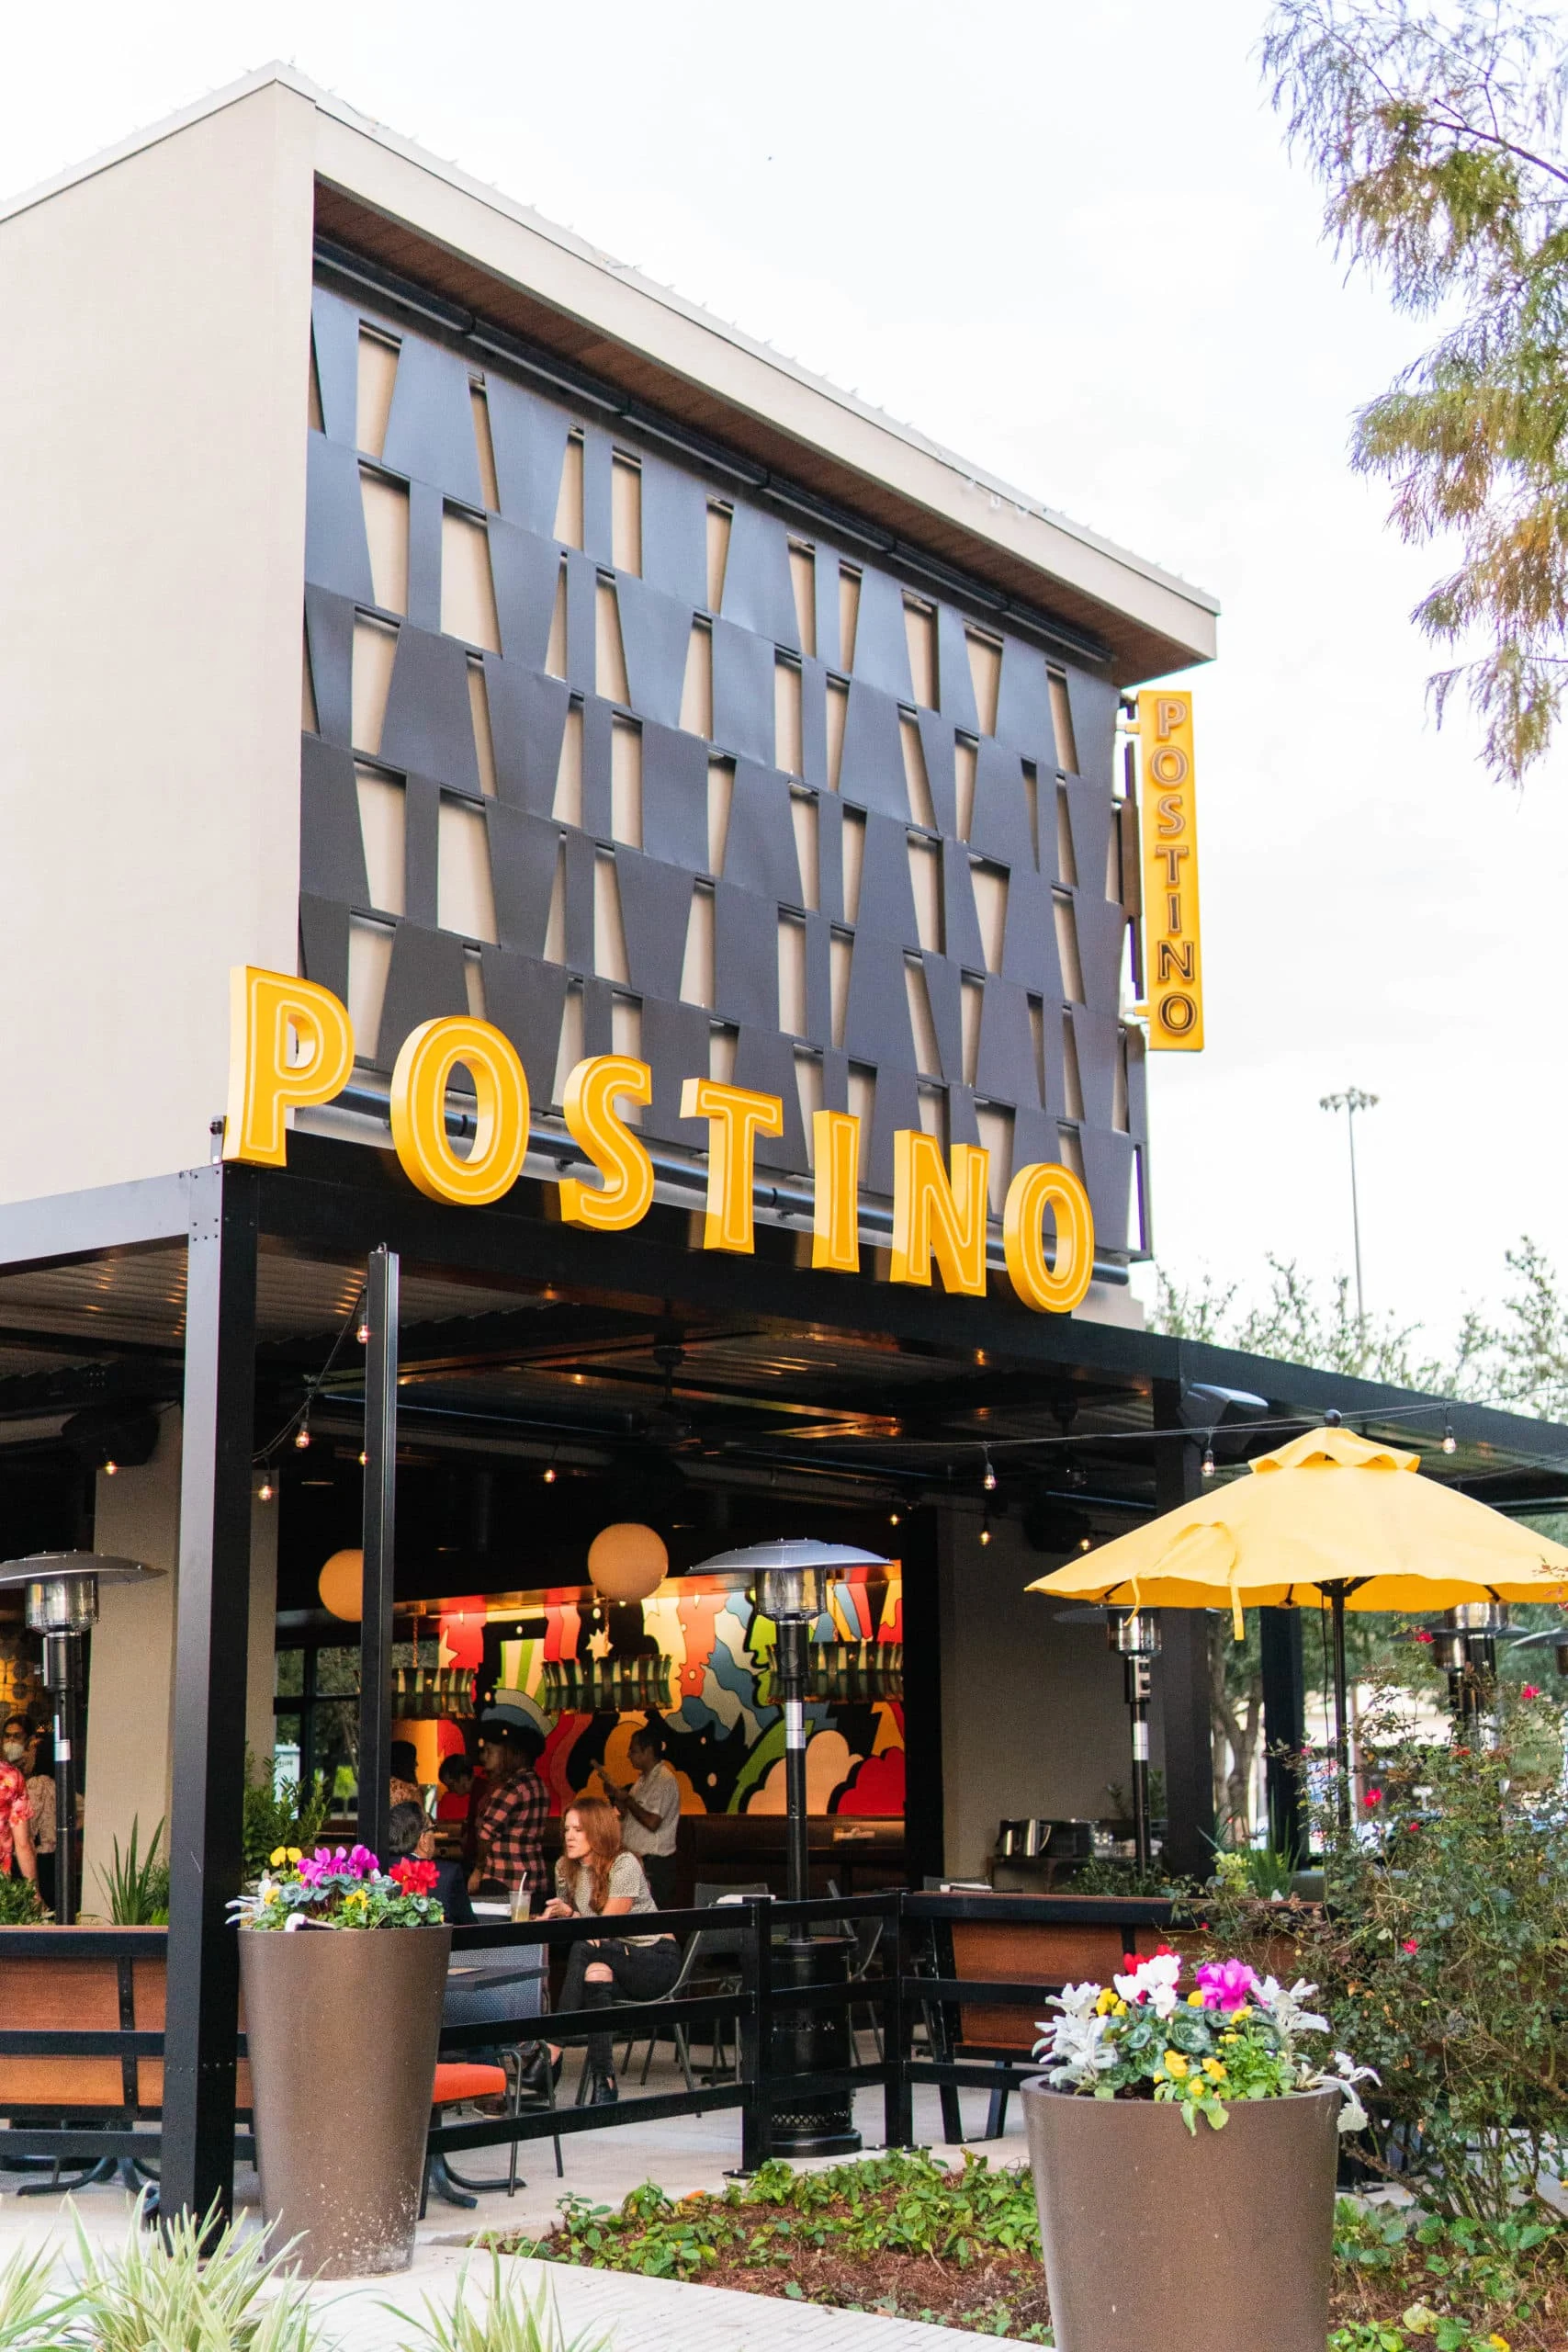 Building with large yellow Postino sign.